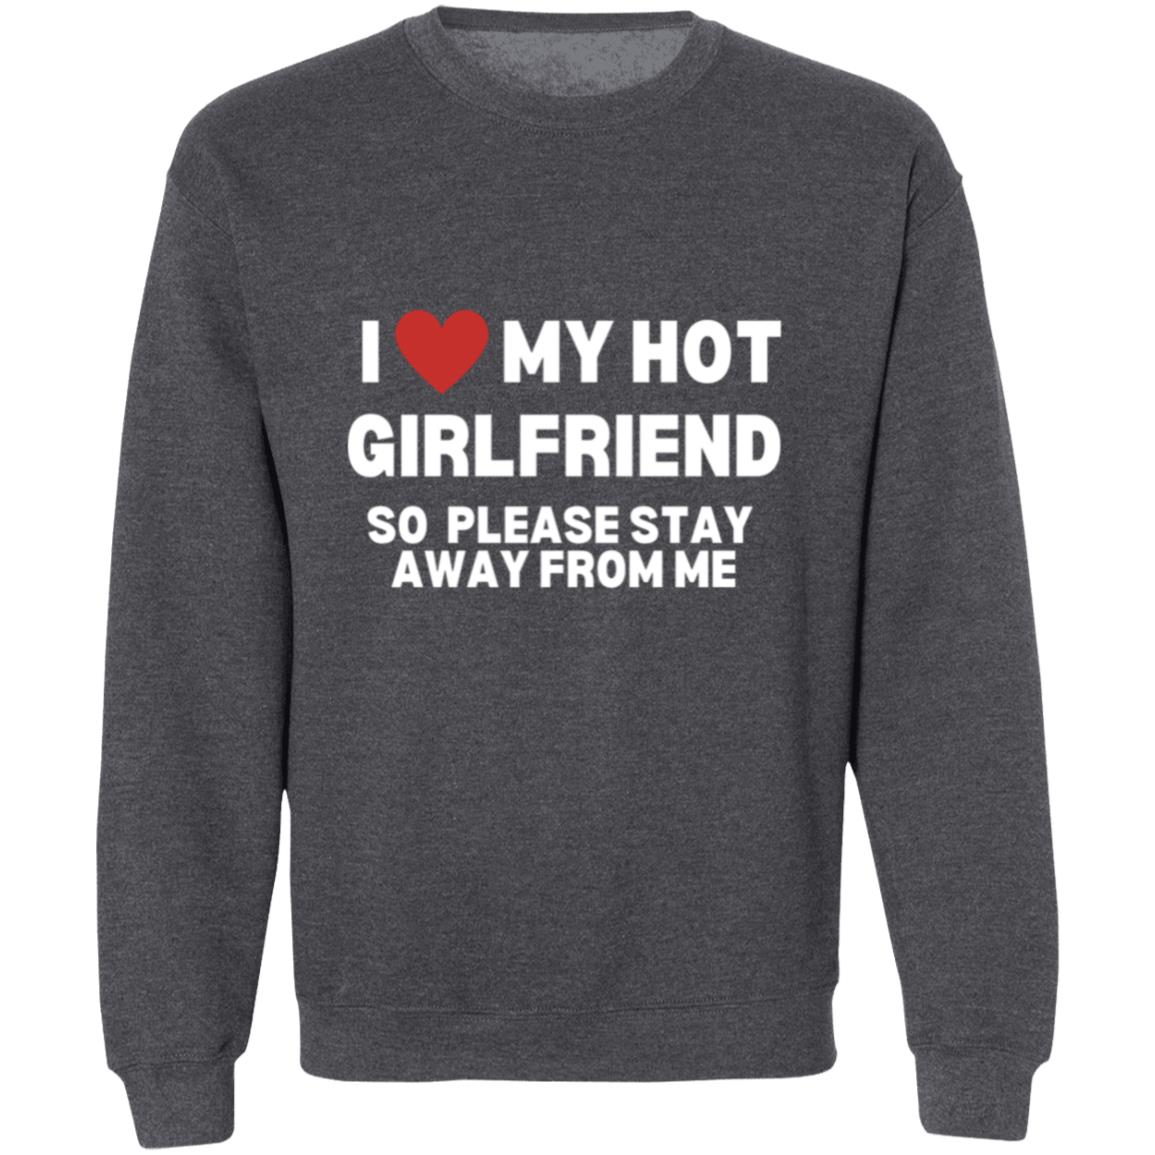 Get trendy with I Love My Hot Girlfriend  Pullover Crewneck Sweatshirt -  available at Good Gift Company. Grab yours for $28 today!